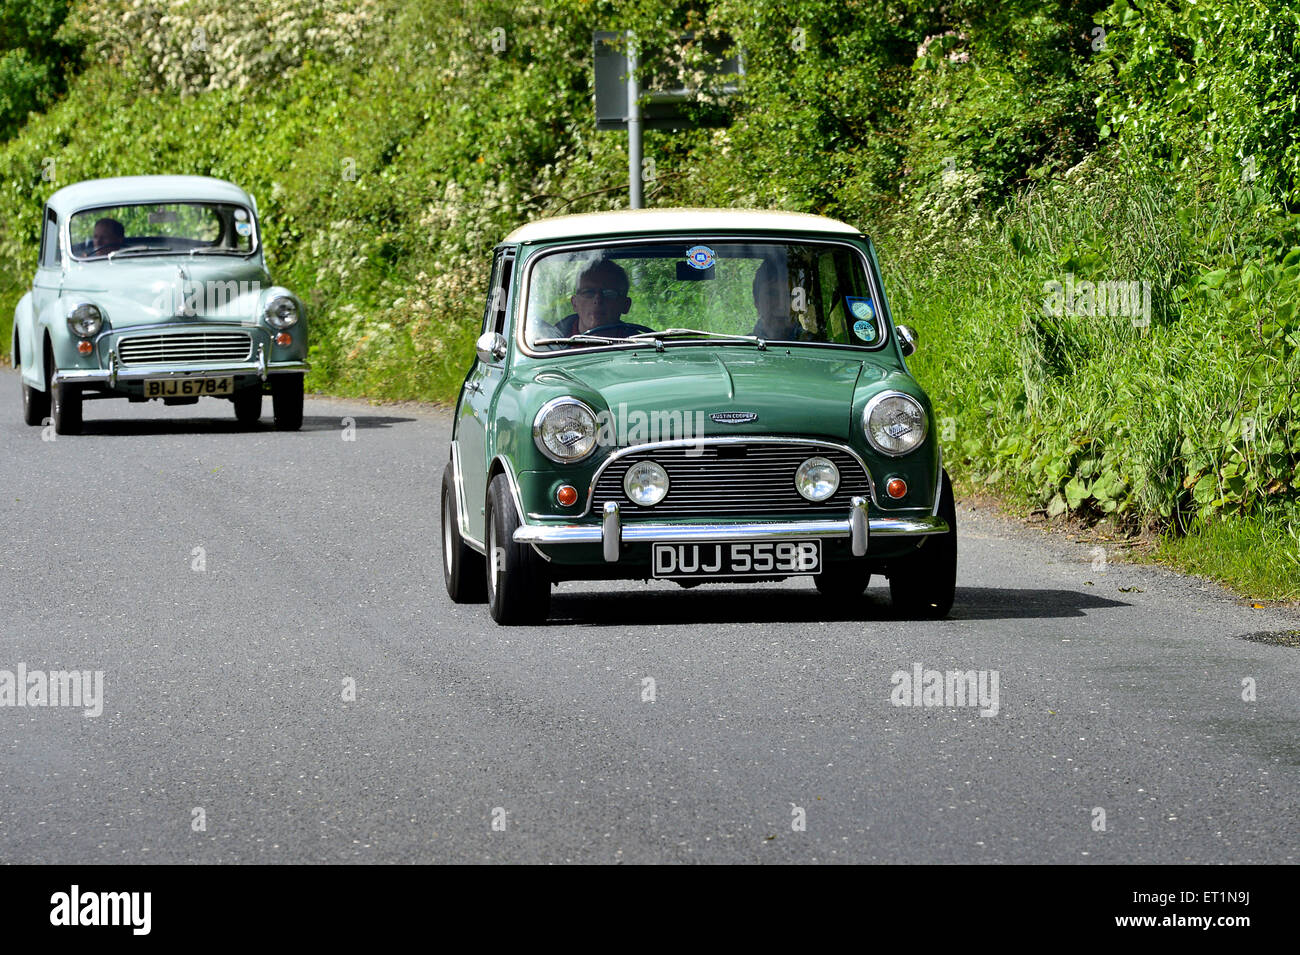 1960s Austin Mini Cooper classic car on country road, Burnfoot, County Donegal, Ireland. Stock Photo